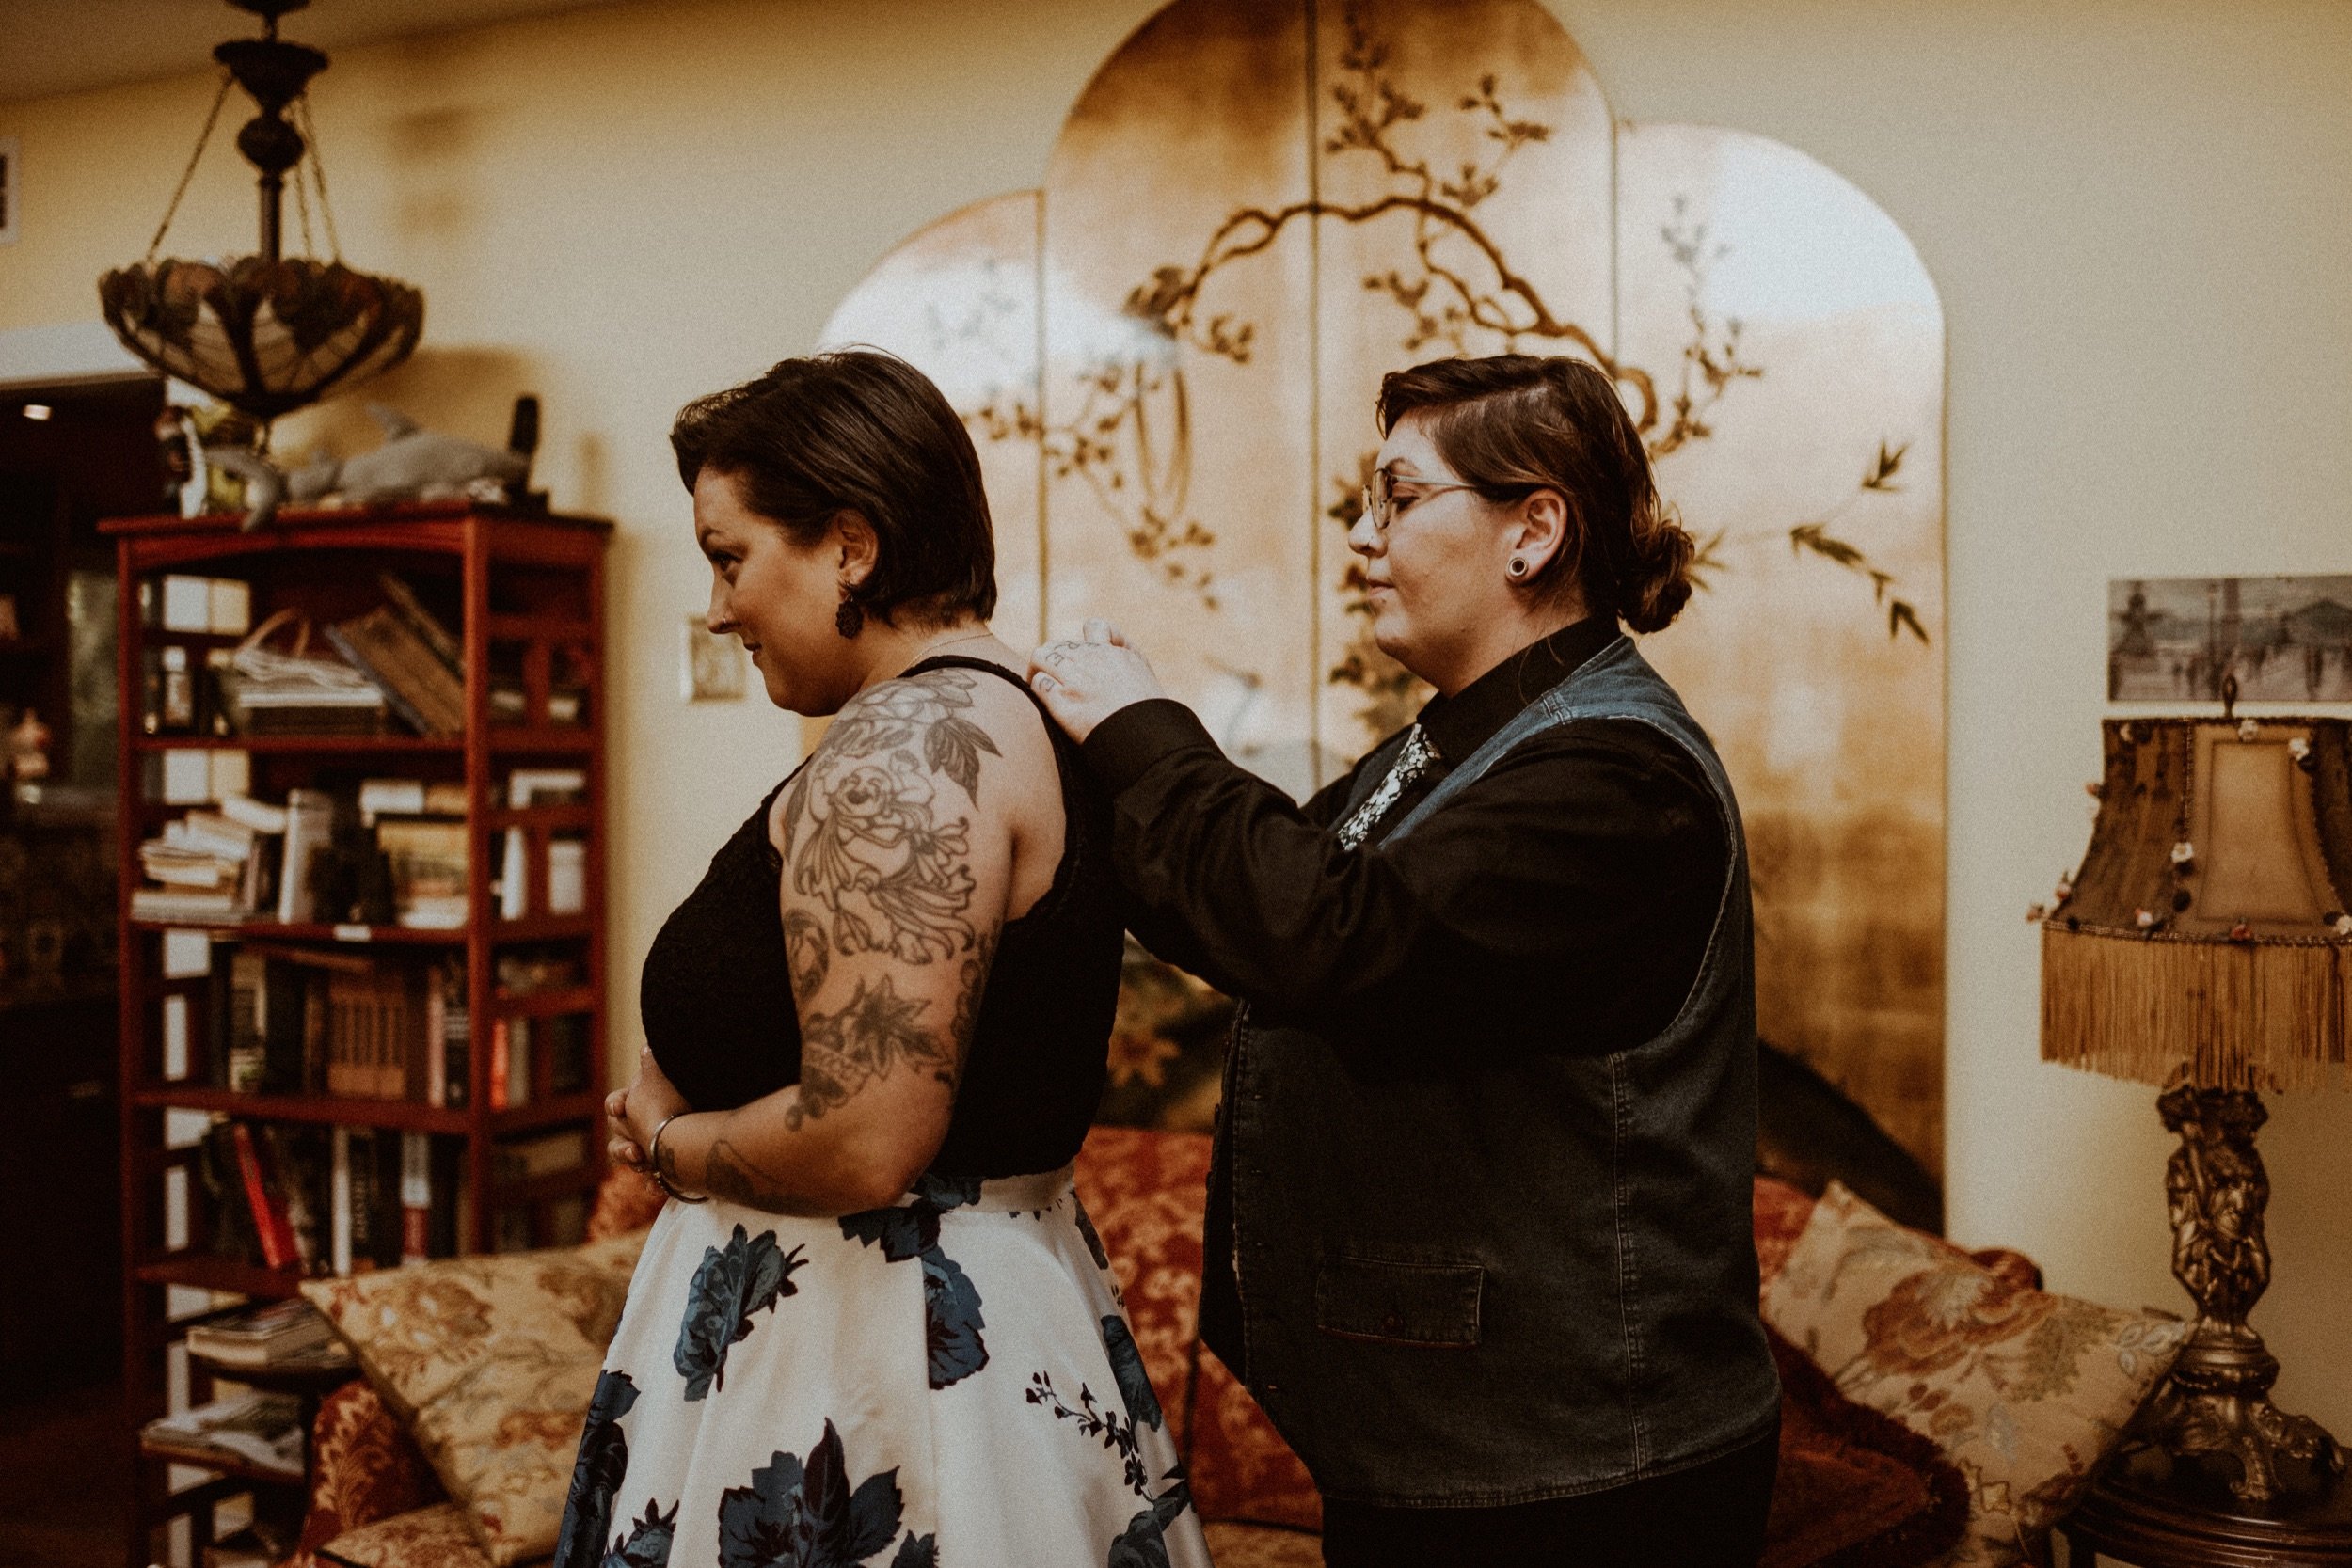 17_Colorful Intimate LGBTQ Wedding in Rockport MA - Vanessa Alves Photography.jpg